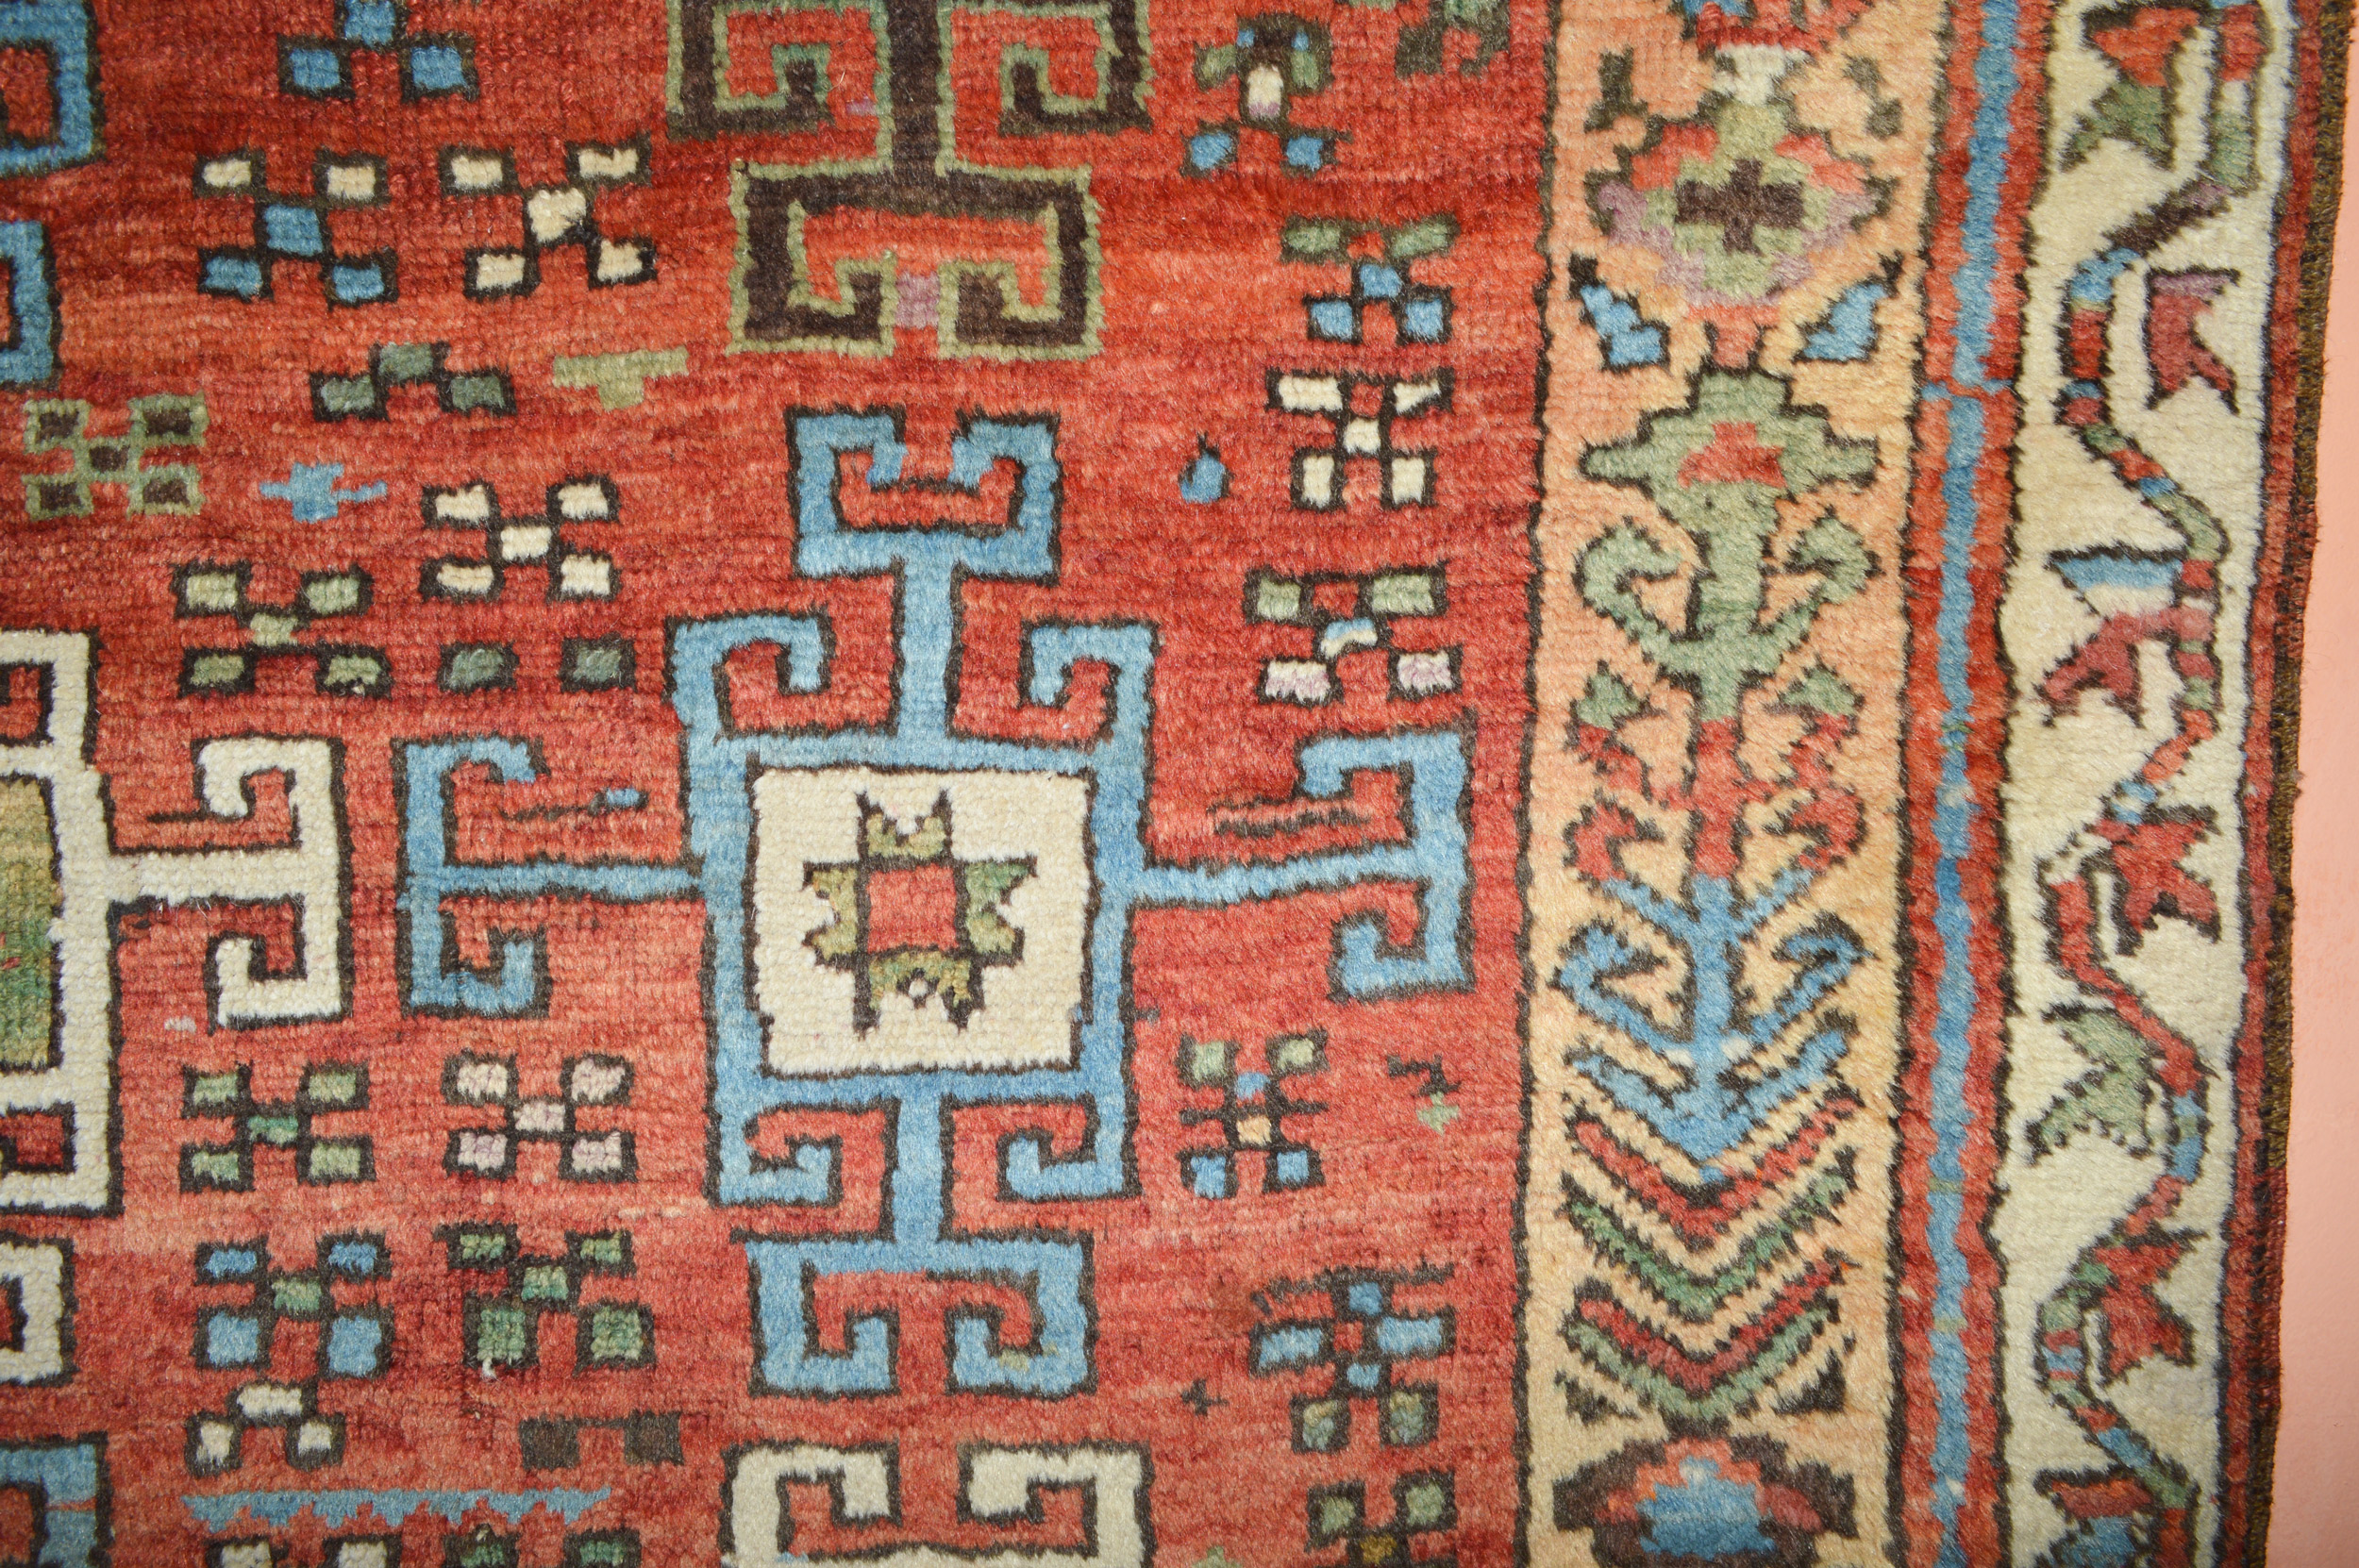 Detail of the field and borders of a 19th century antique Turkish Konya rug. The terra cotta color field is decorated with geometric medallions, circa 1880. Douglas Stock Gallery is one of America's most selective dealers in antique Oriental rugs, antique rugs Boston, antique rugs New York by appointment